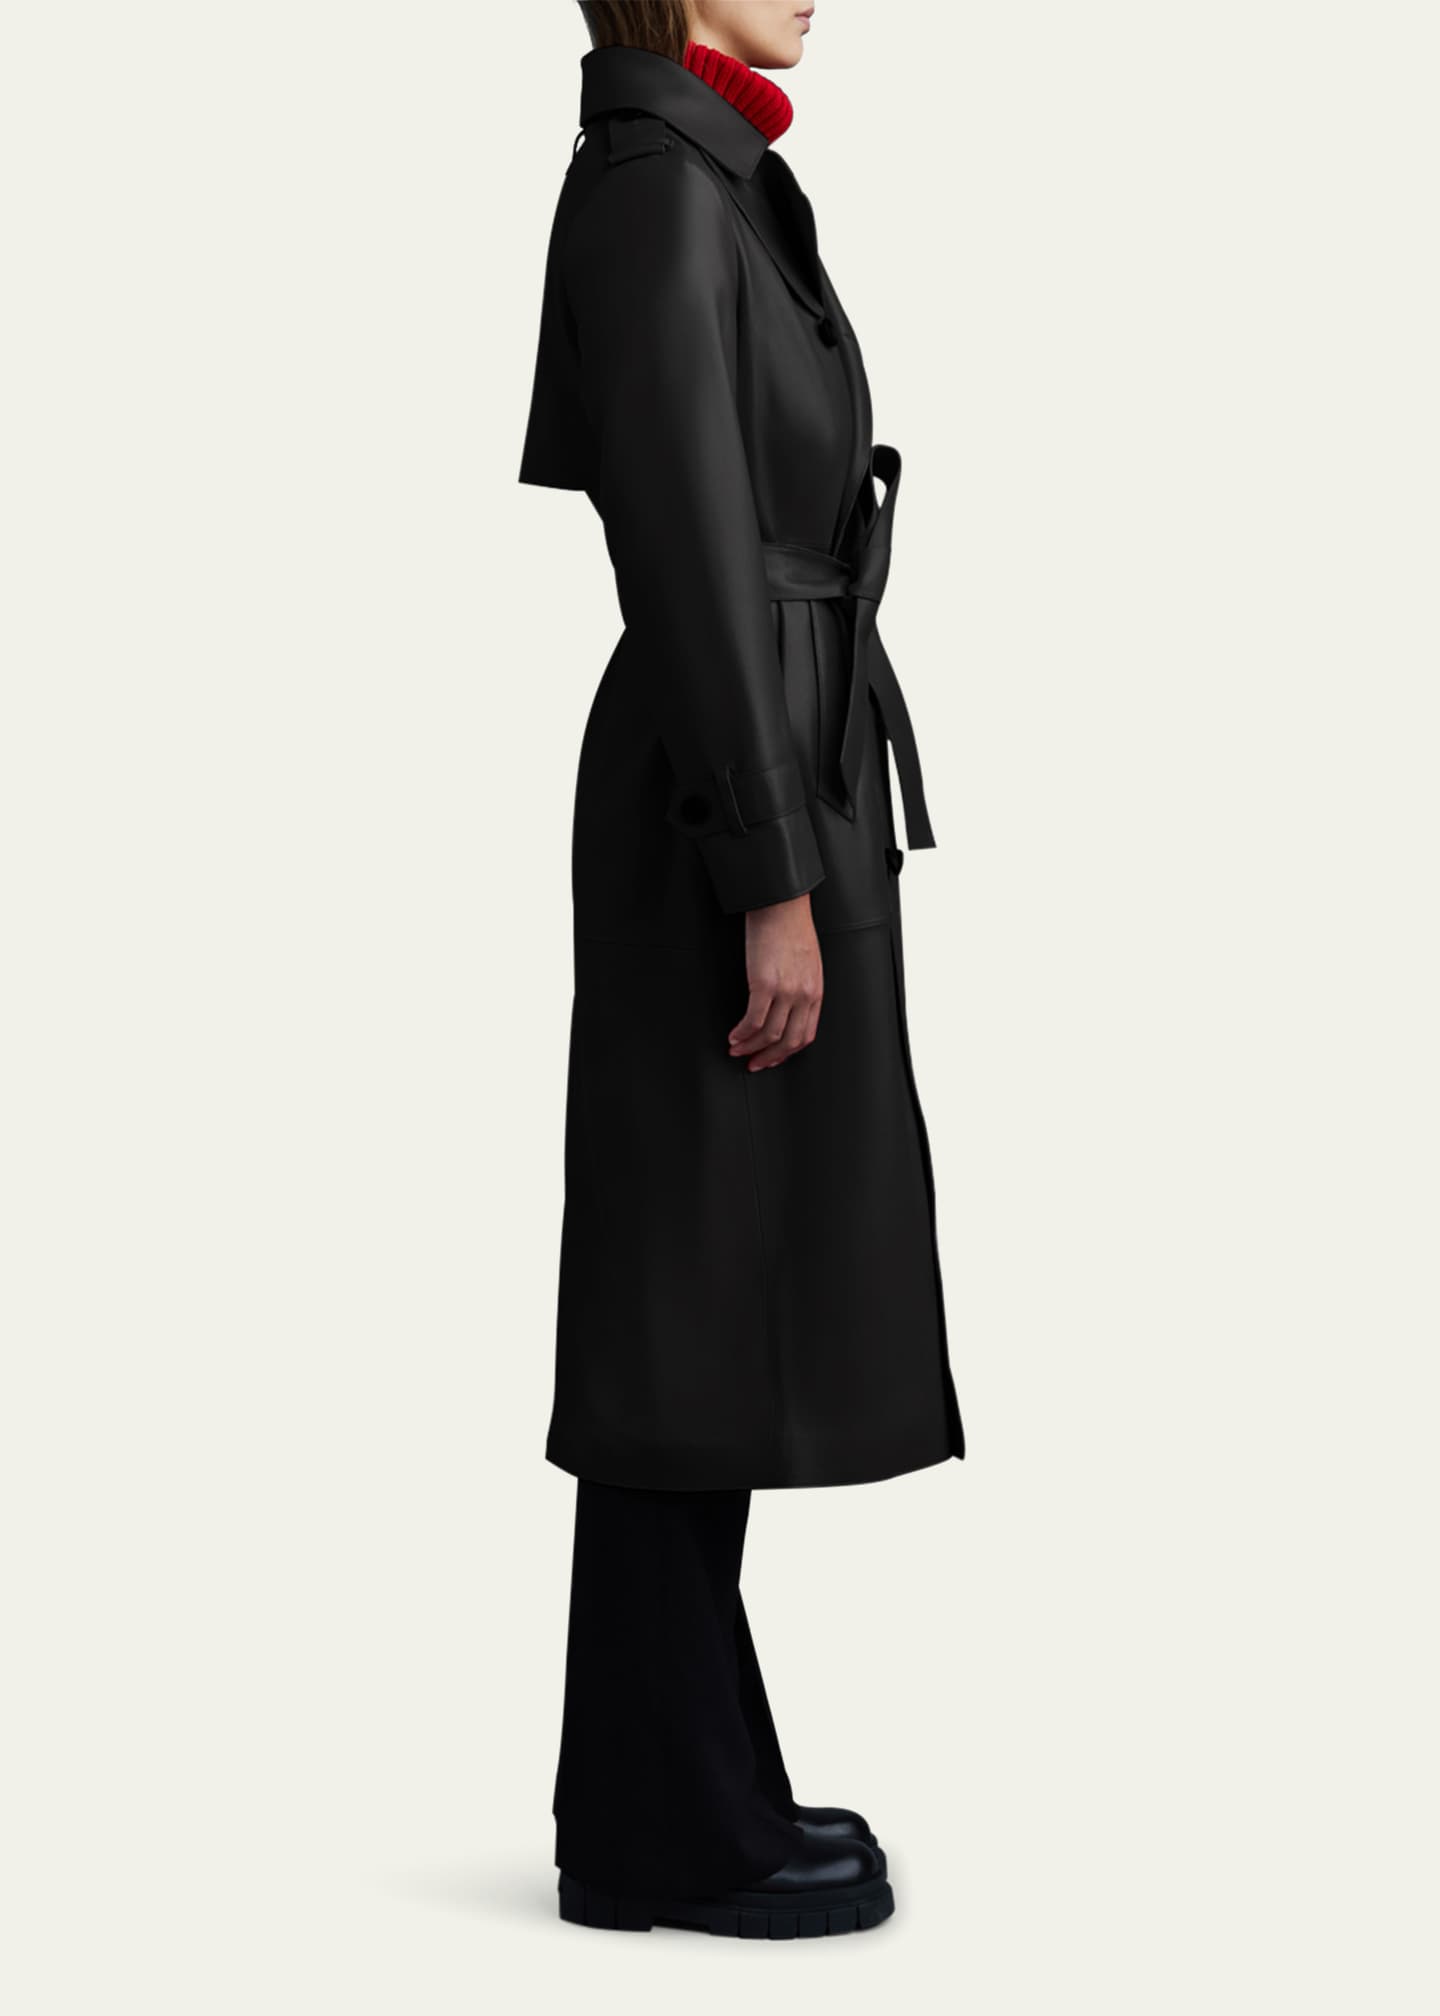 Mackage Gael Belted Leather Trench Coat - Bergdorf Goodman